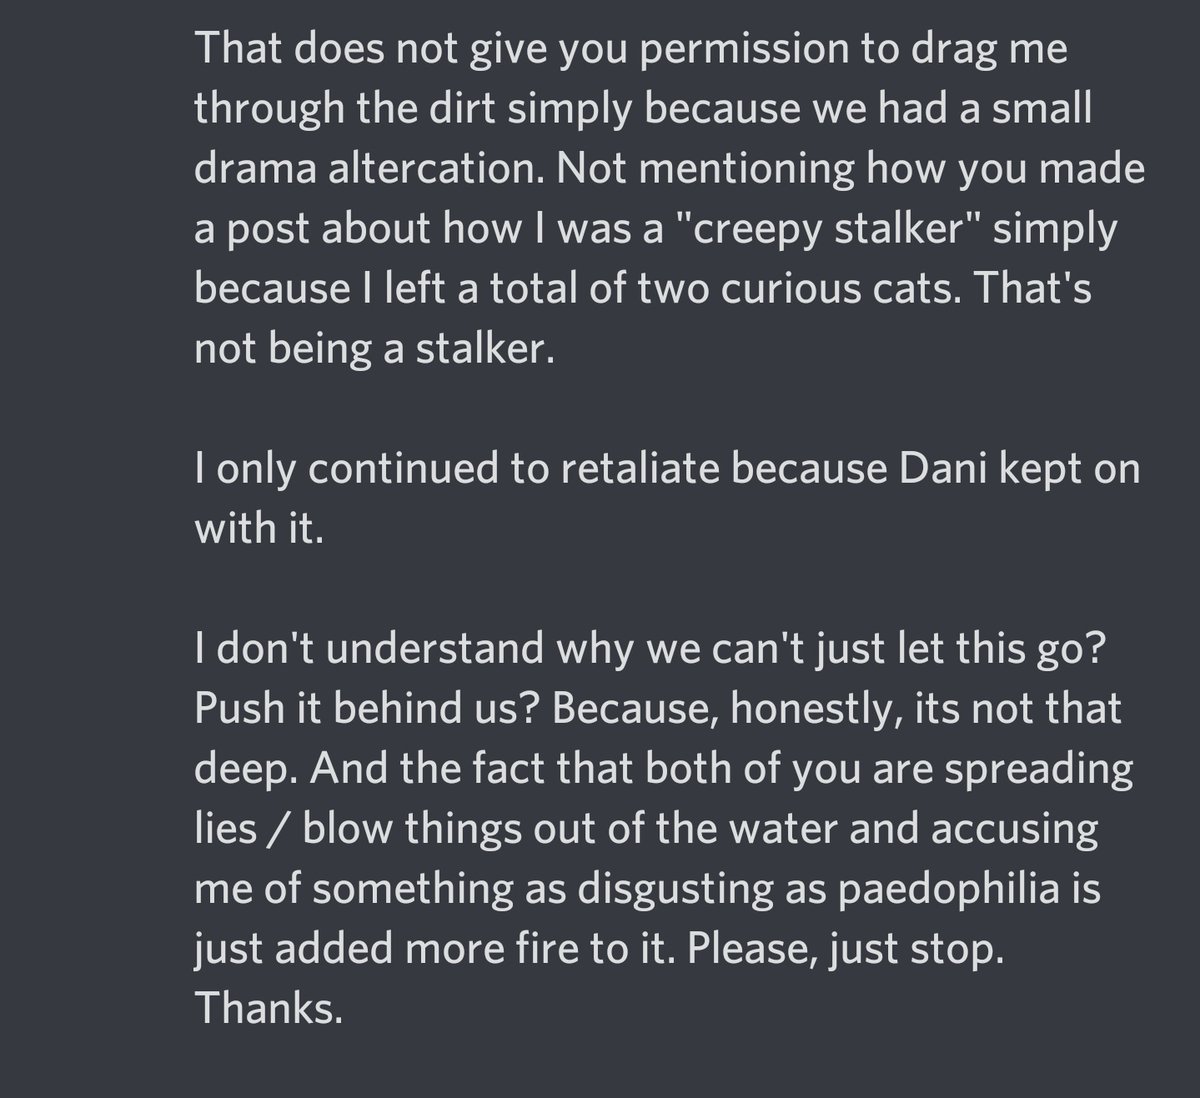 The message from him on discord is as followed, including some previous messages that make it very clear that I did not know he was rintarxu, and he said nothing about being him either.